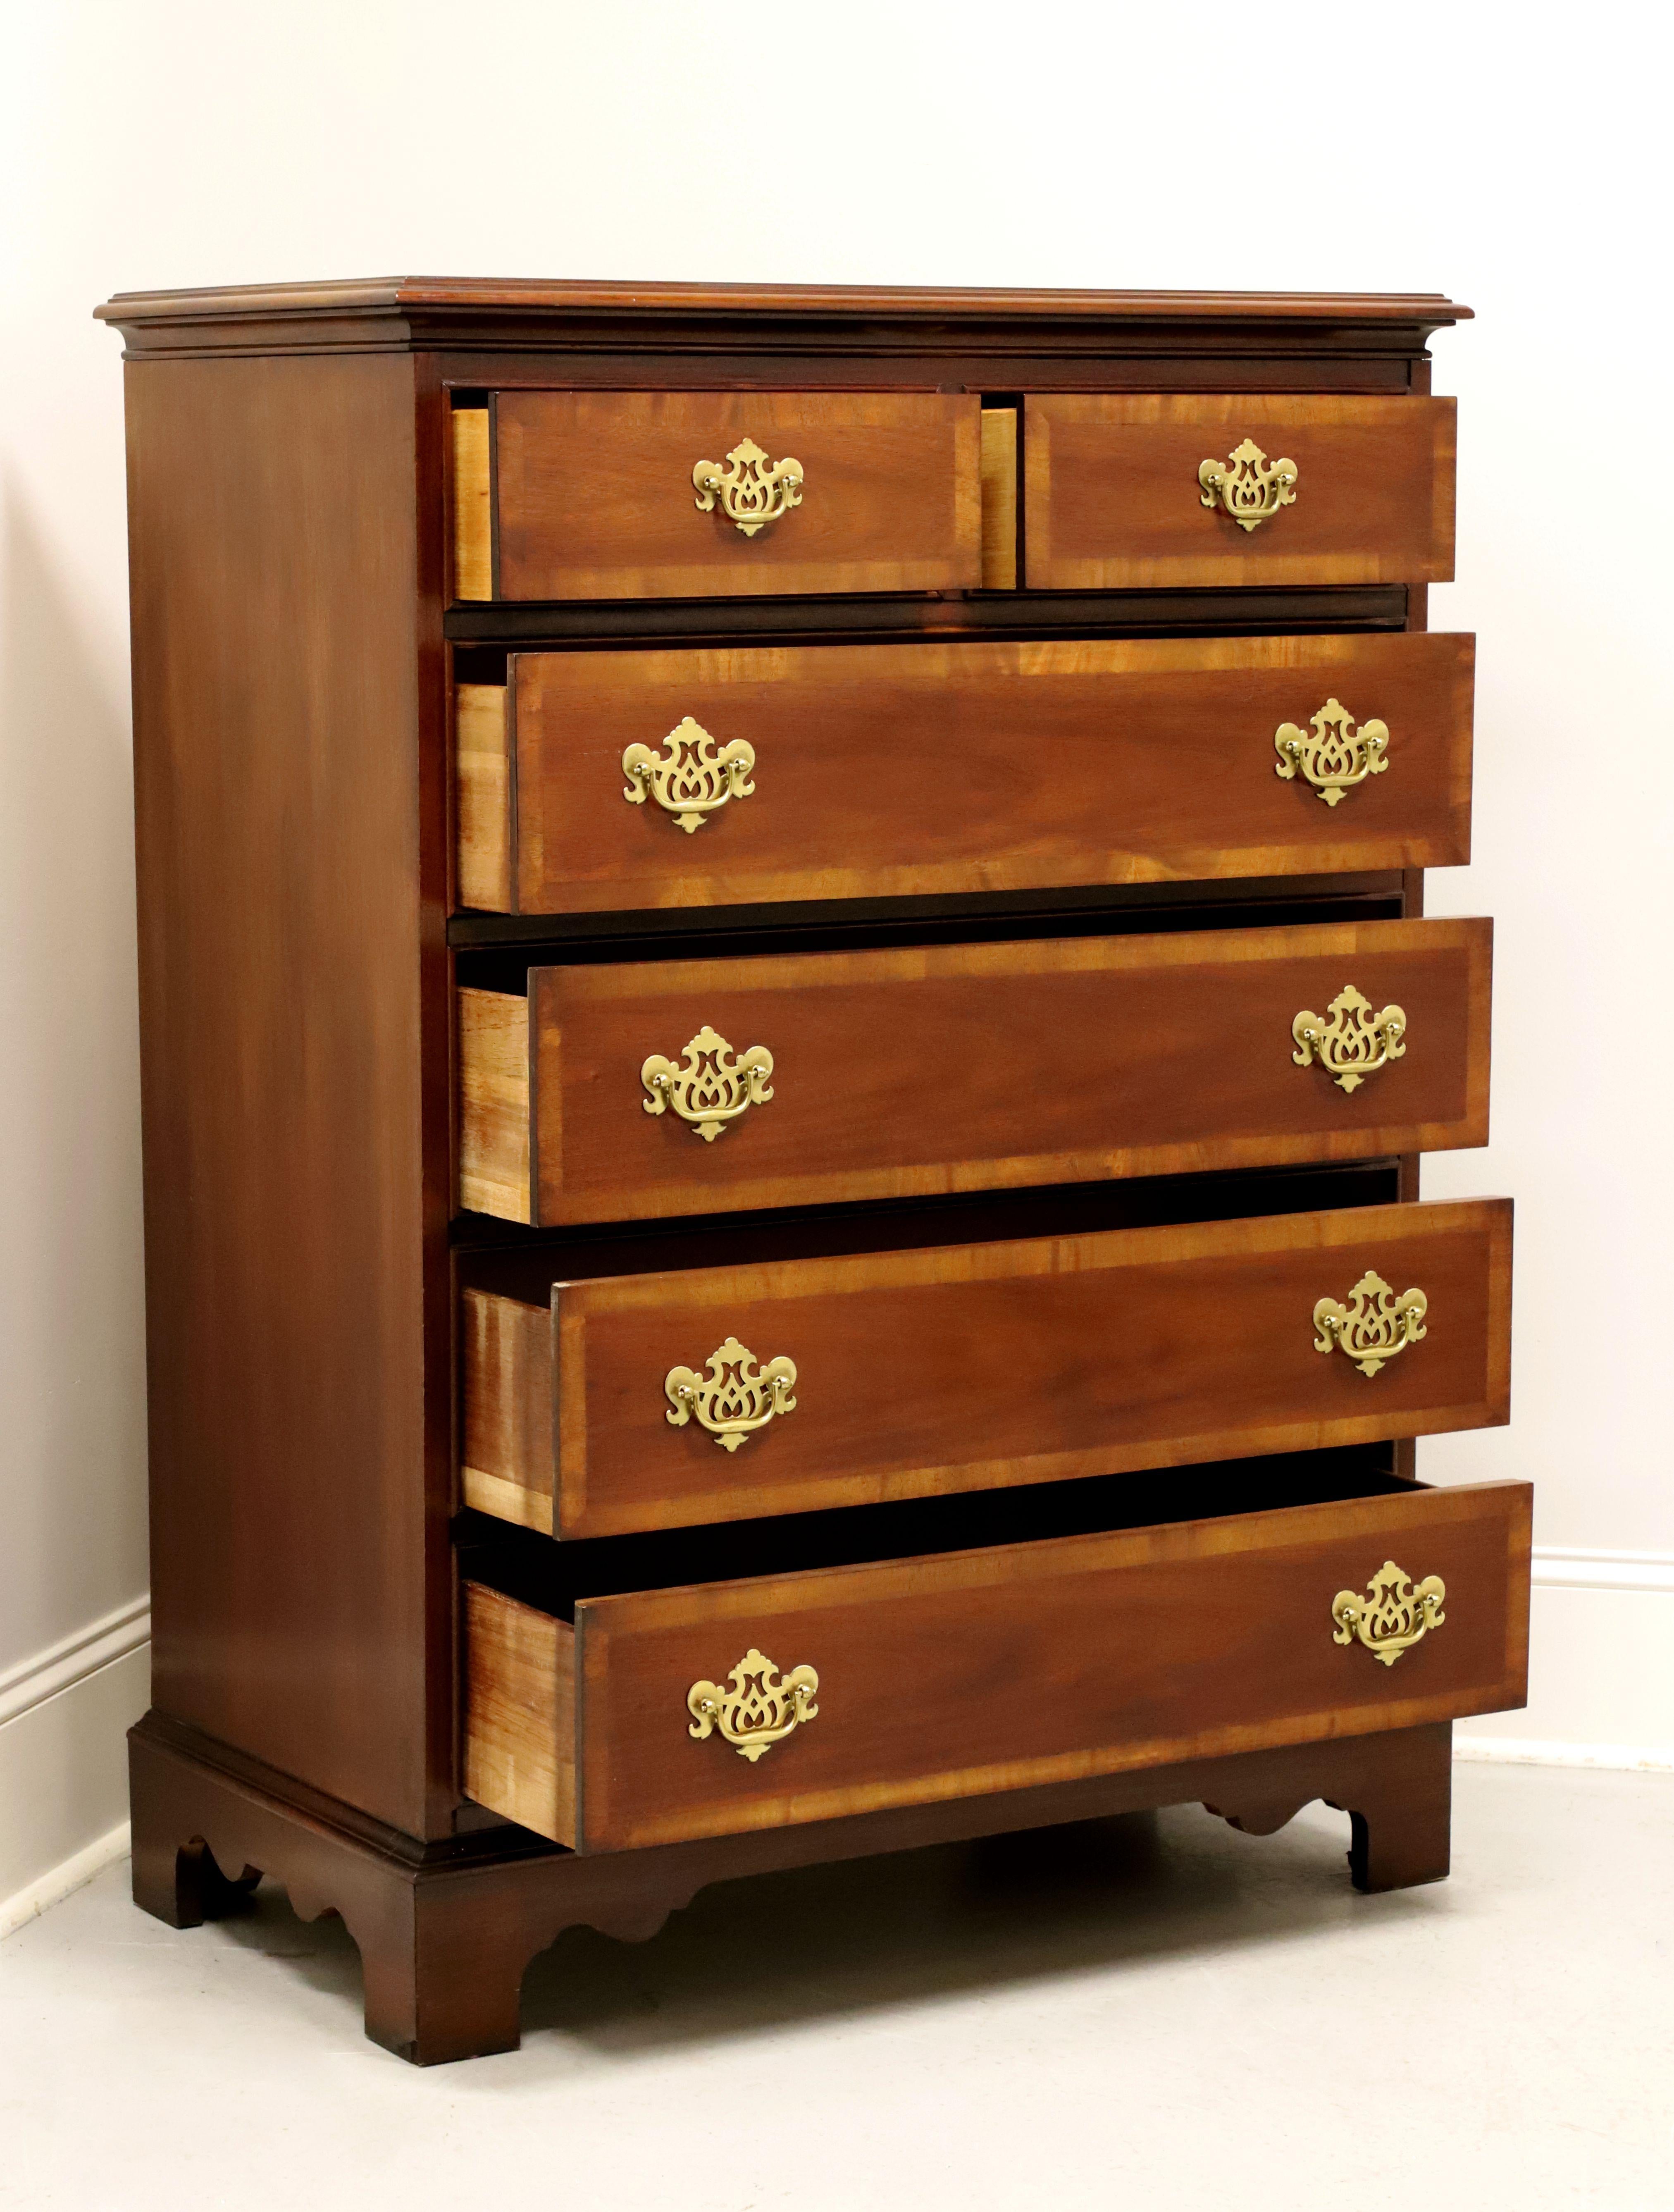 DIXIE Banded Mahogany Chippendale Chest of Six Drawers - A In Good Condition For Sale In Charlotte, NC